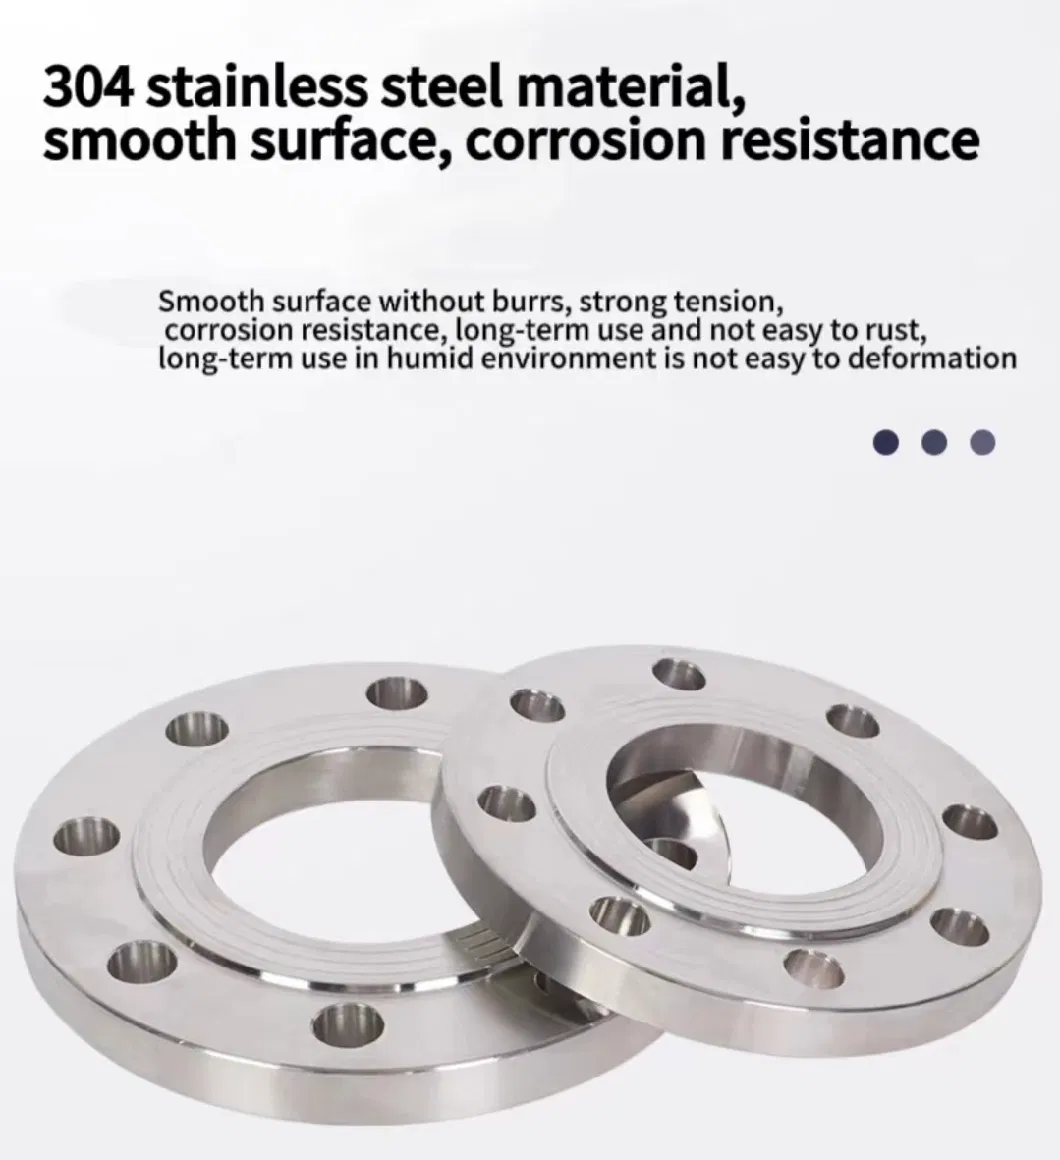 304/316L Stainless Steel Plate Flat Welded Flange